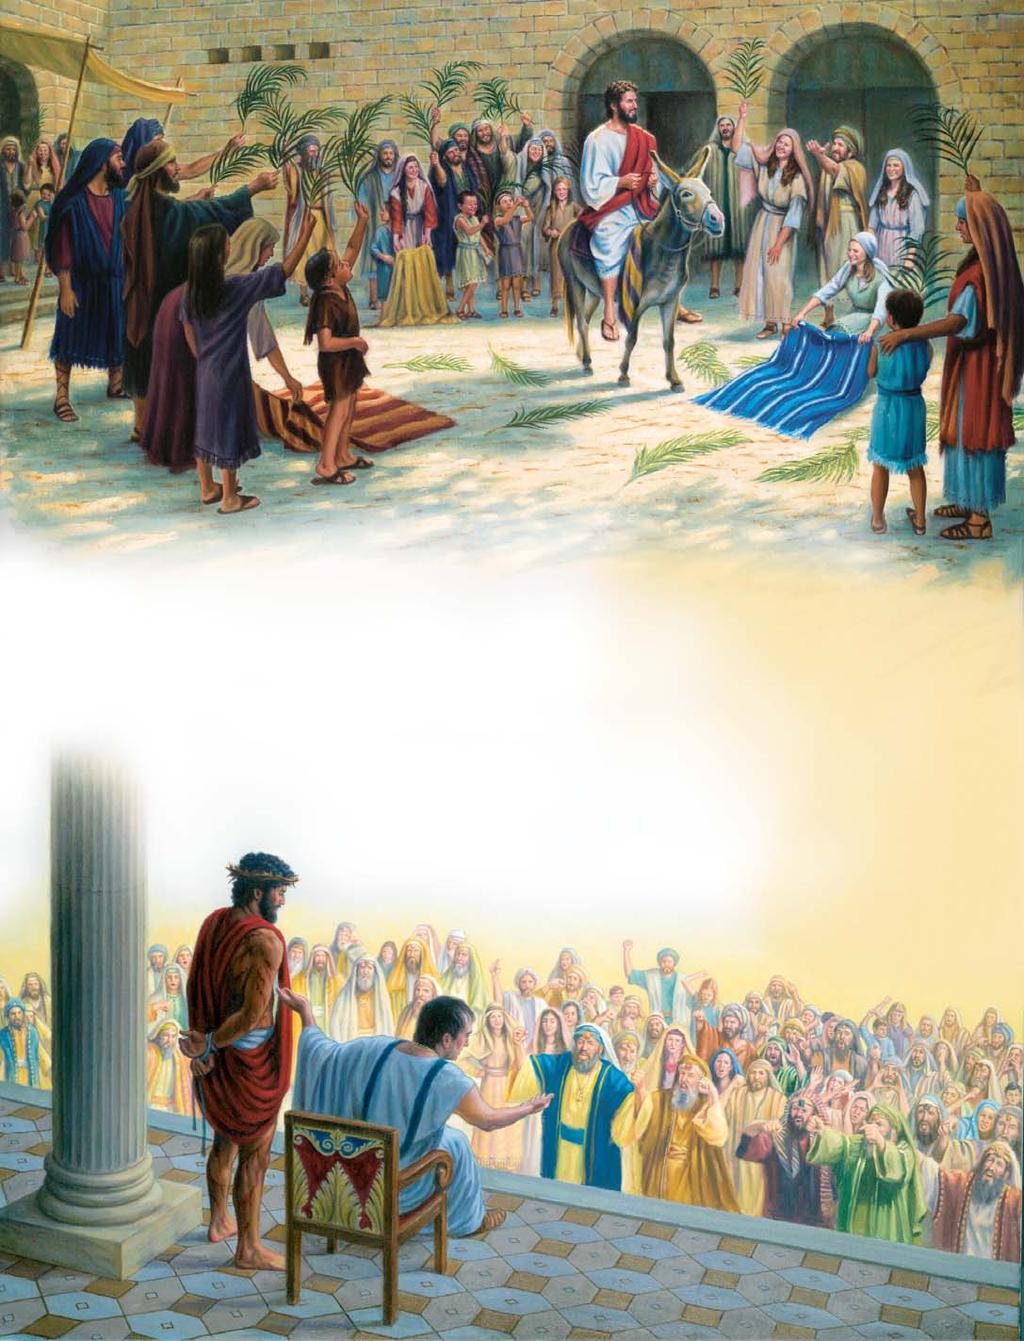 thingwrong.so,finally,afterbringingjesus outside for the last time, Pilate says: See! Your king! But the people shout: Take him away! Take him away! Impale him!